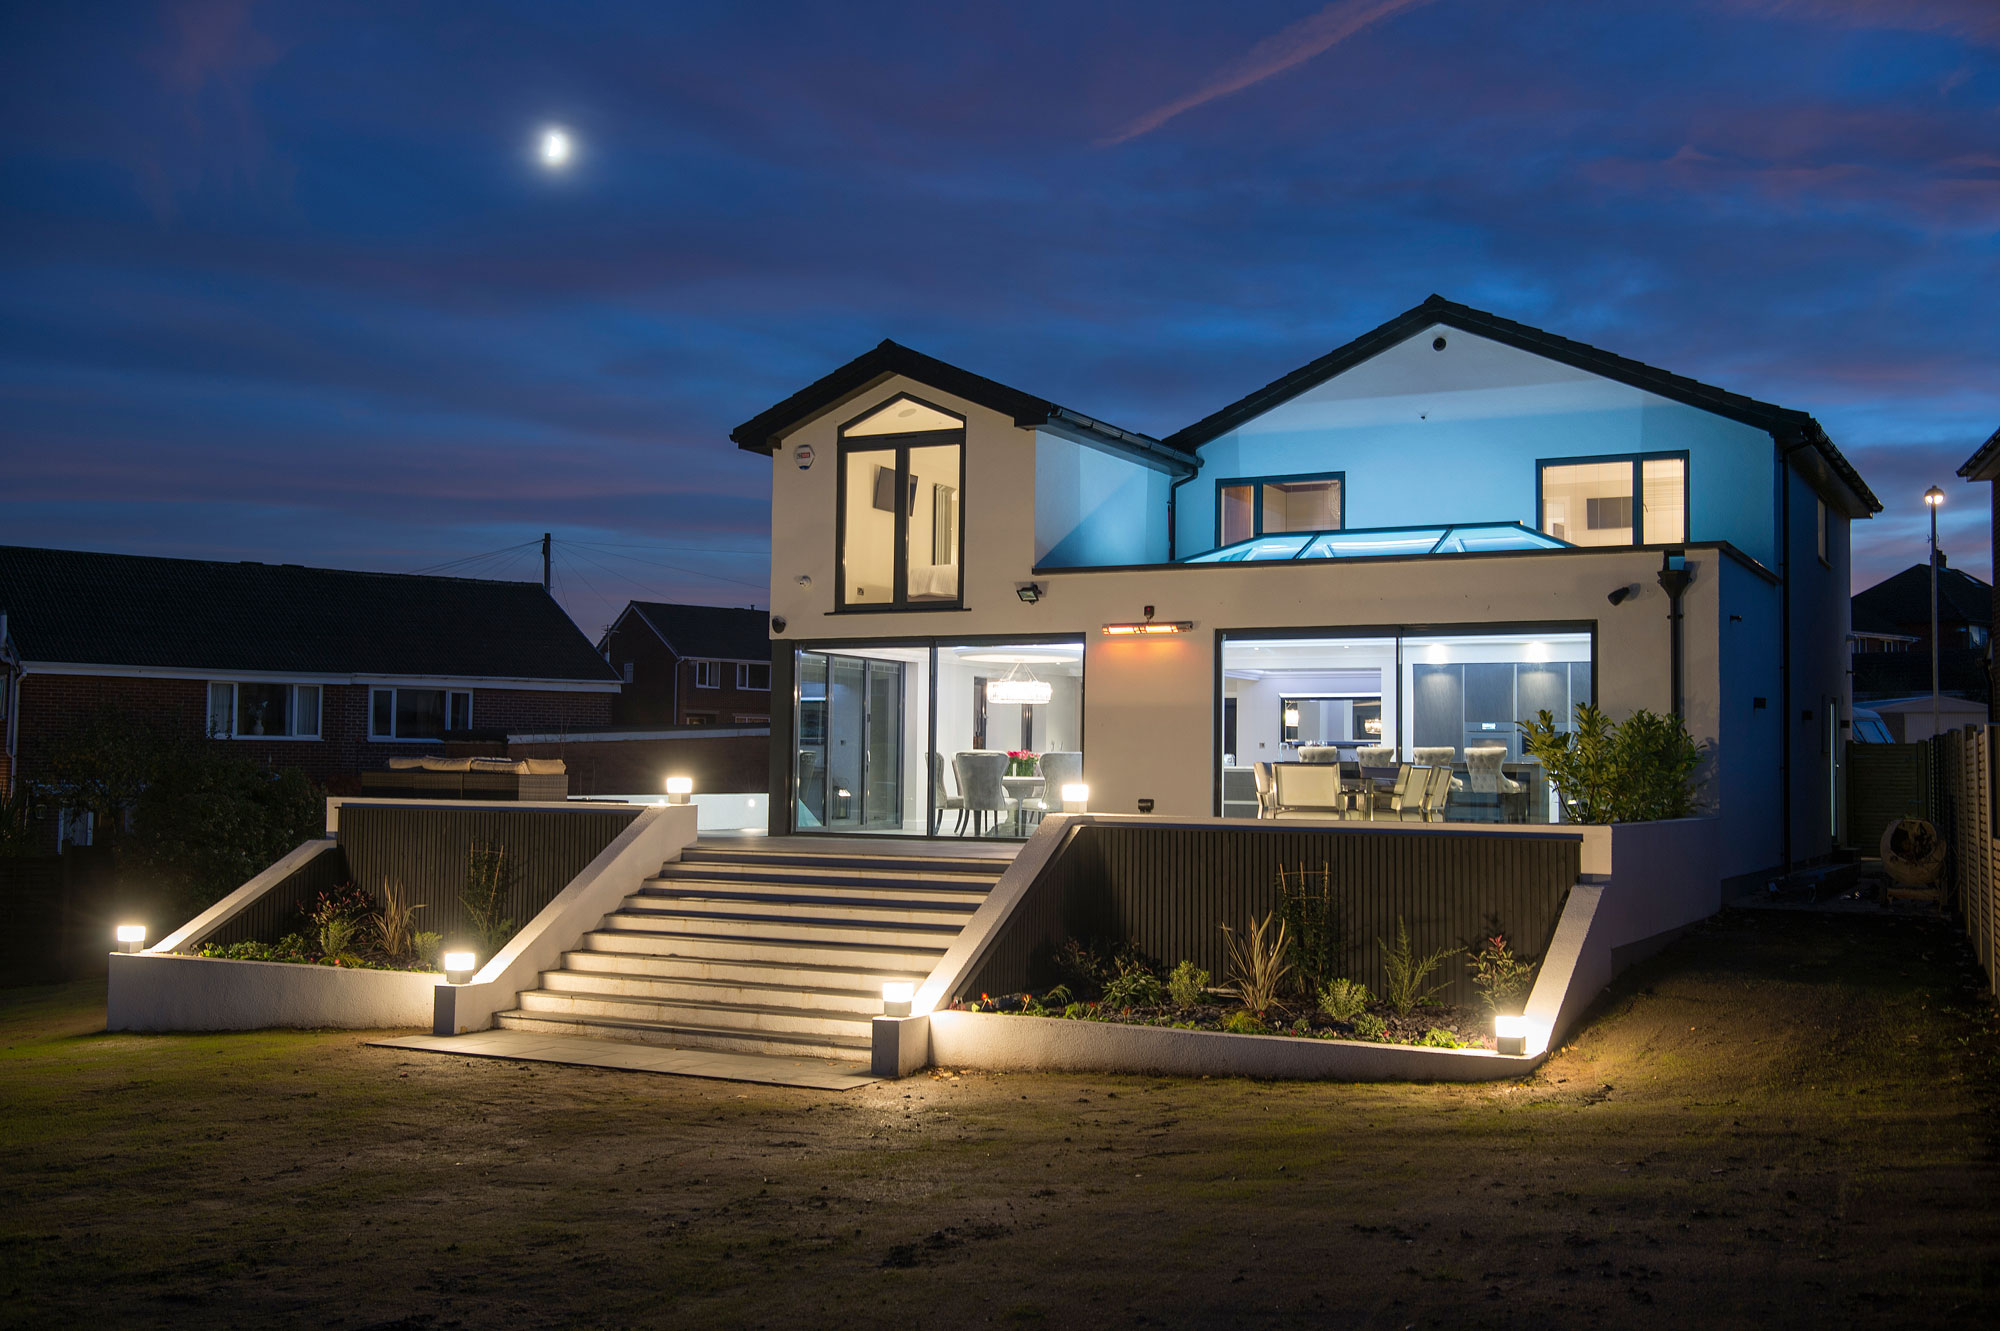 Contemporary house with extension at dusk